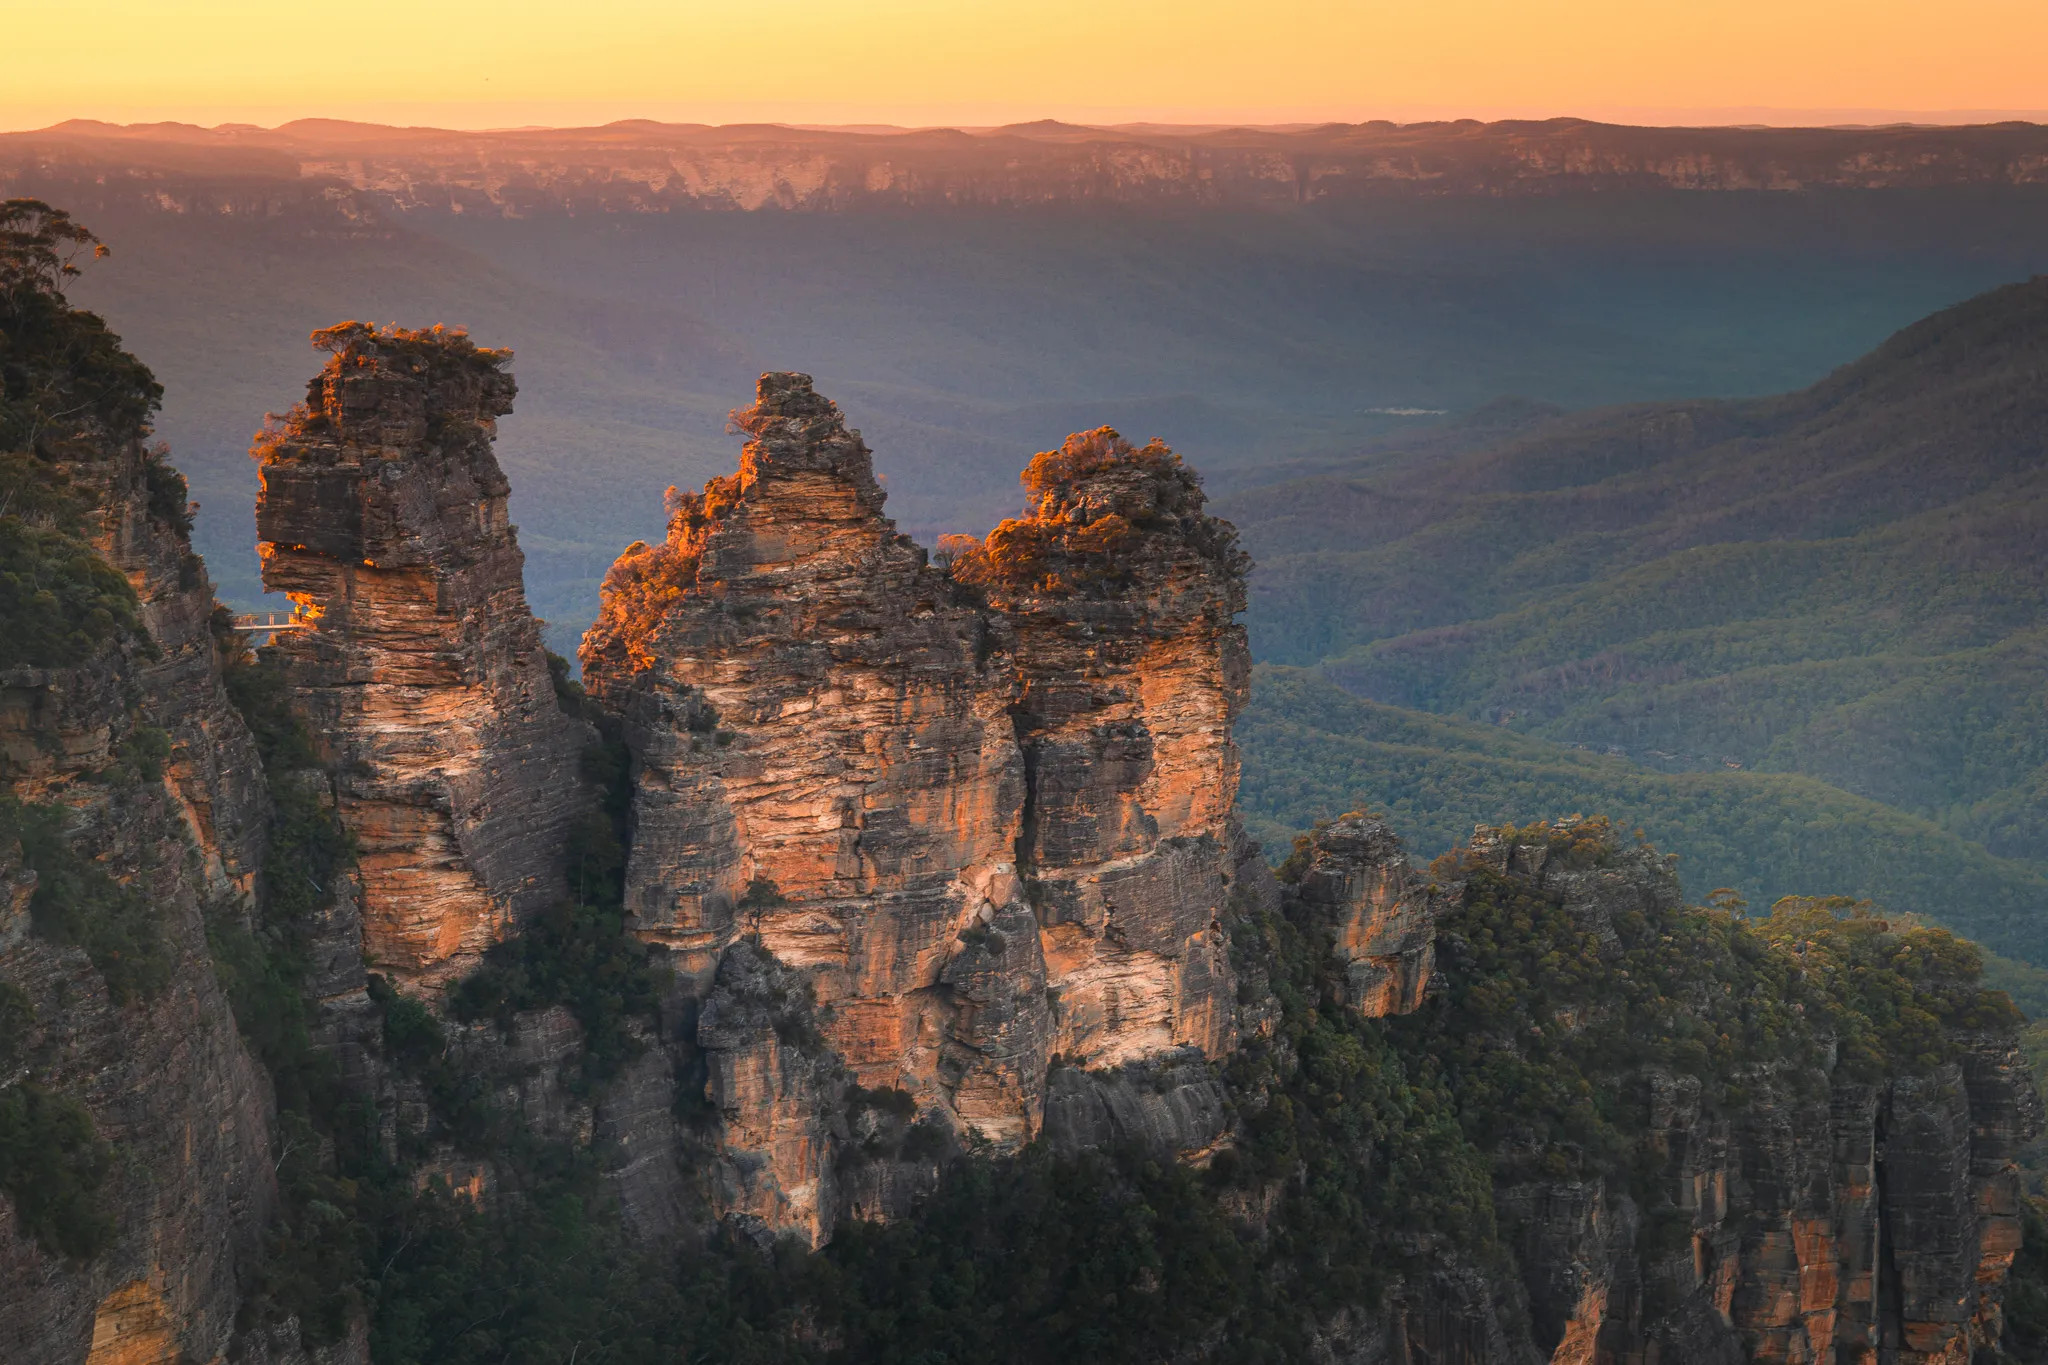 The Three Sisters rock formation in the Blue Mountains National Park, Australia at sunrise